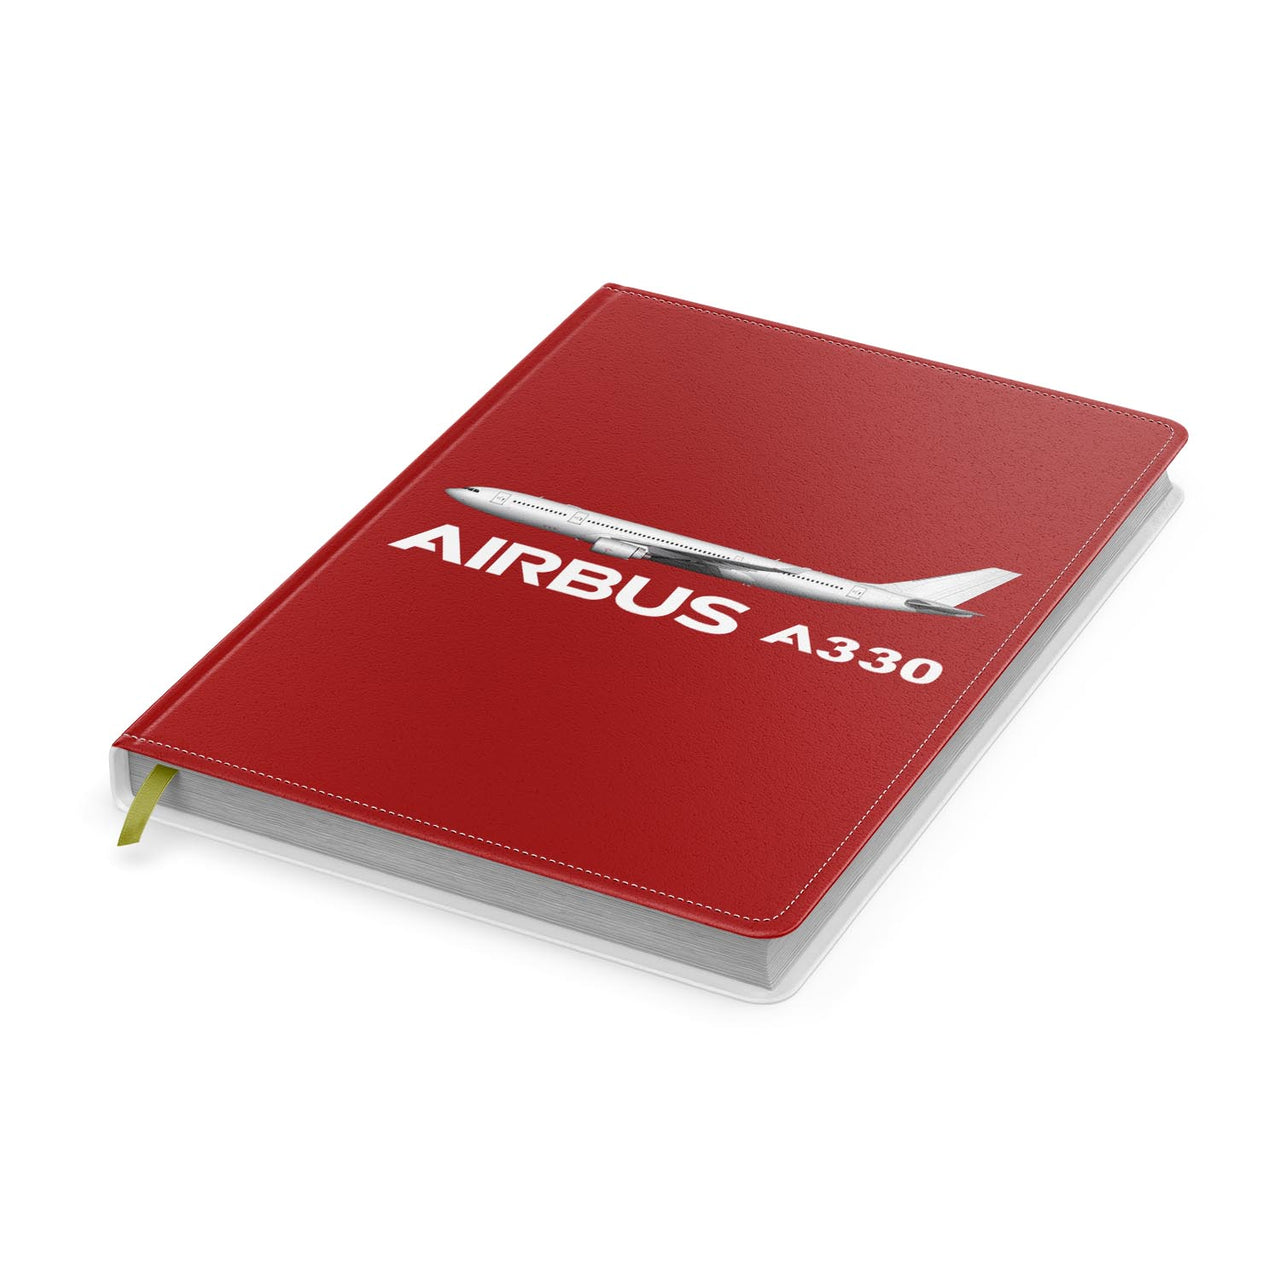 The Airbus A330 Designed Notebooks